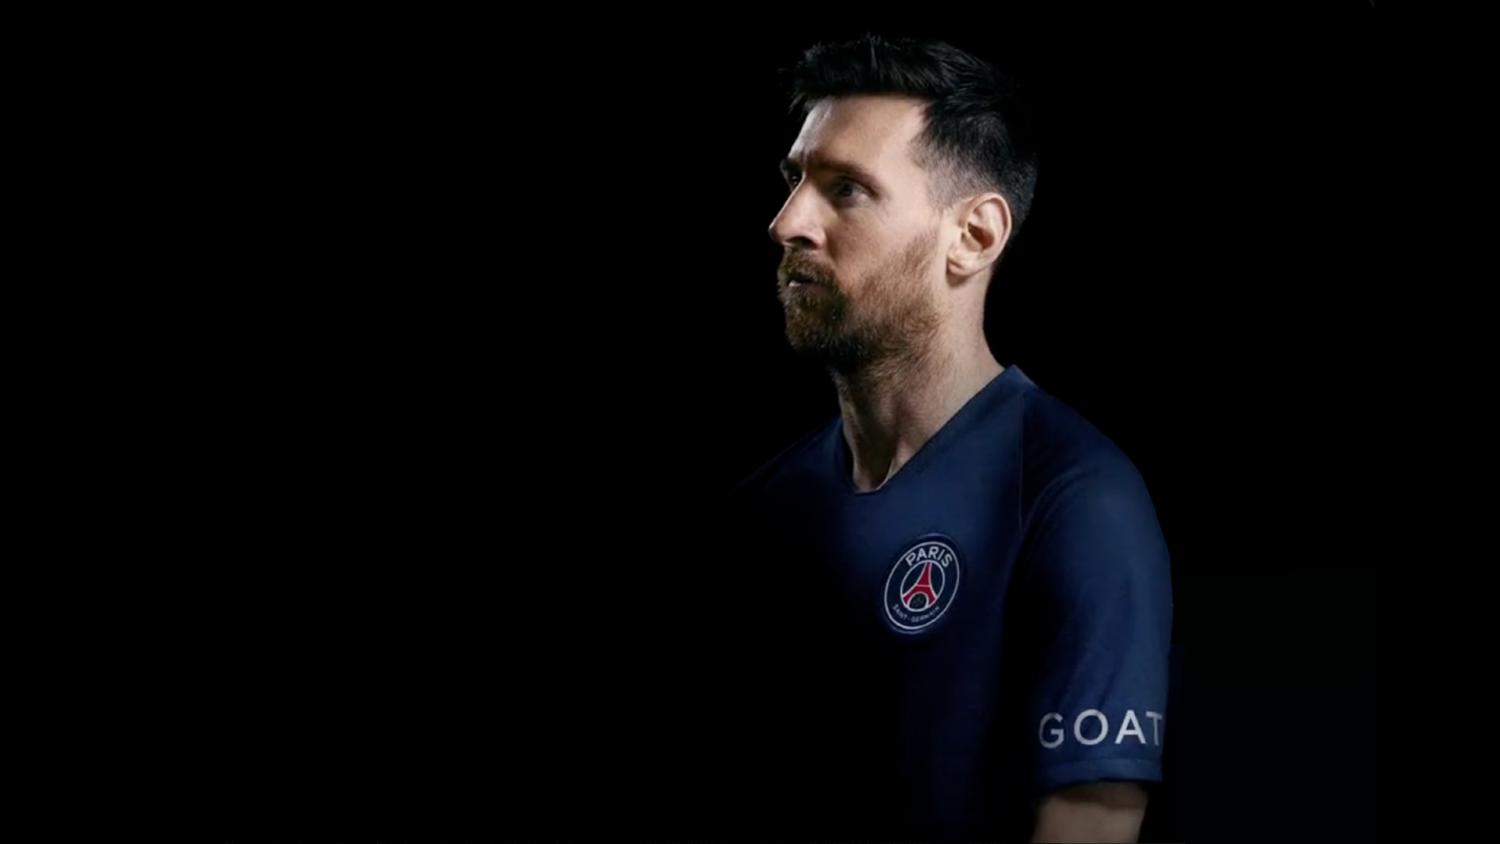 New PSG Deal Lionel Messi Will Carry The Word GOAT On His Sleeve